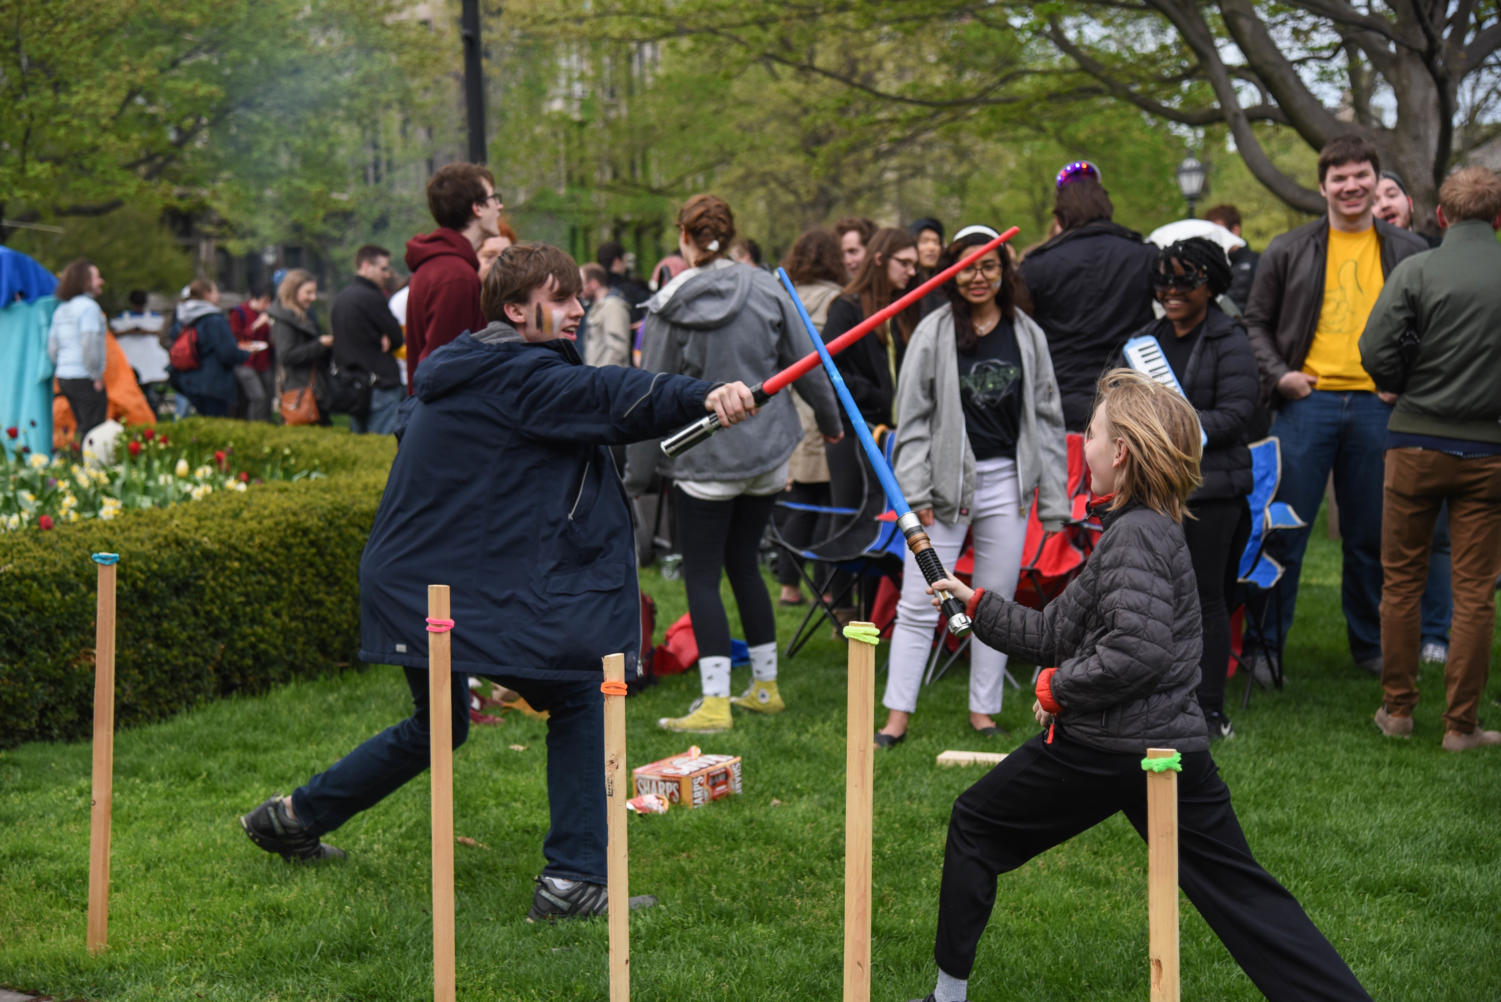 Scavvies participate in a lawn game at Tailgate on Friday.